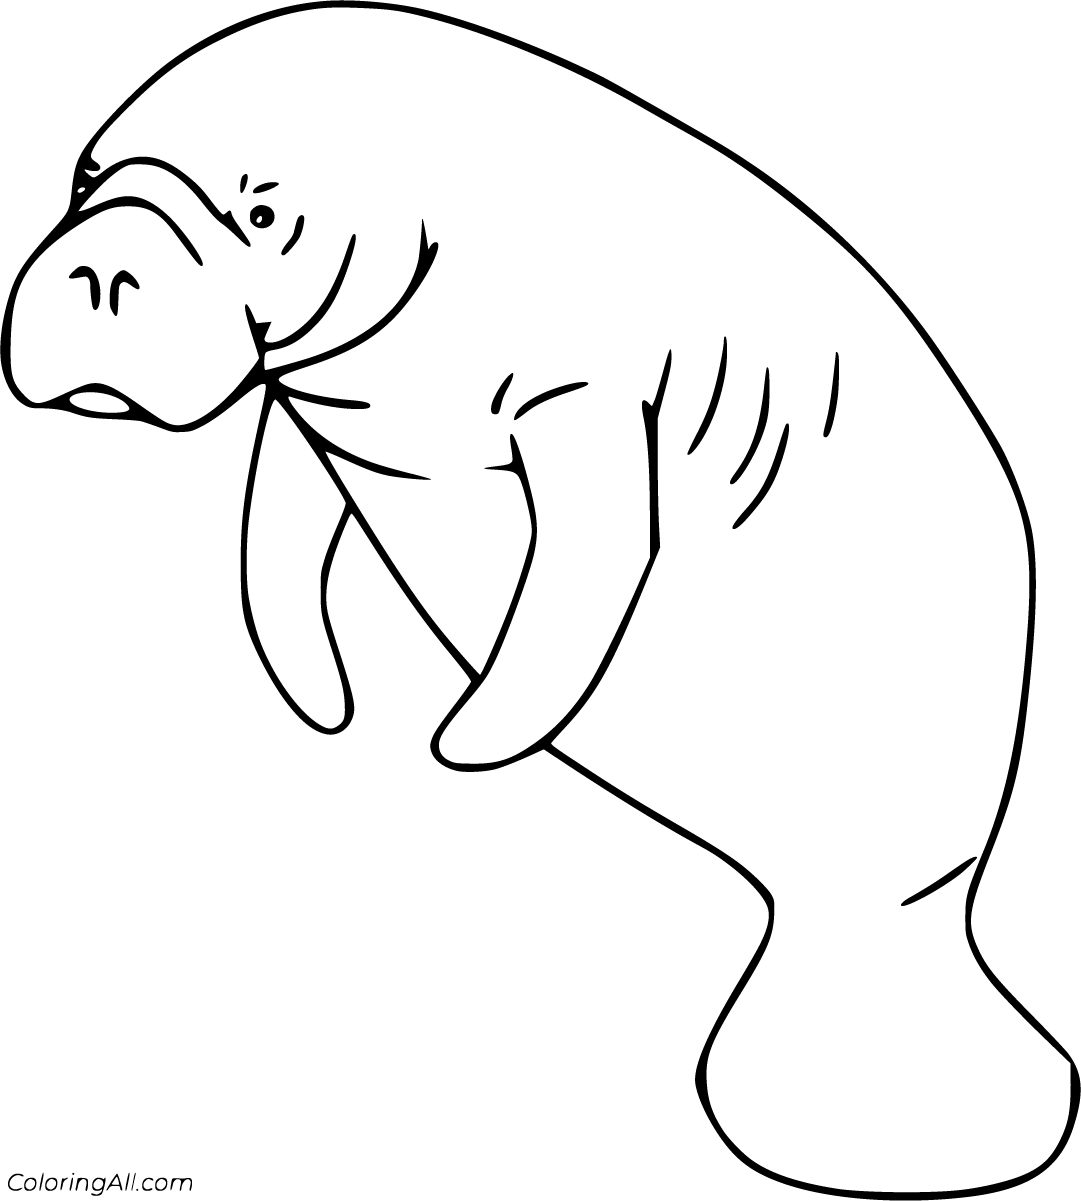 Manatee Coloring Pages - ColoringAll